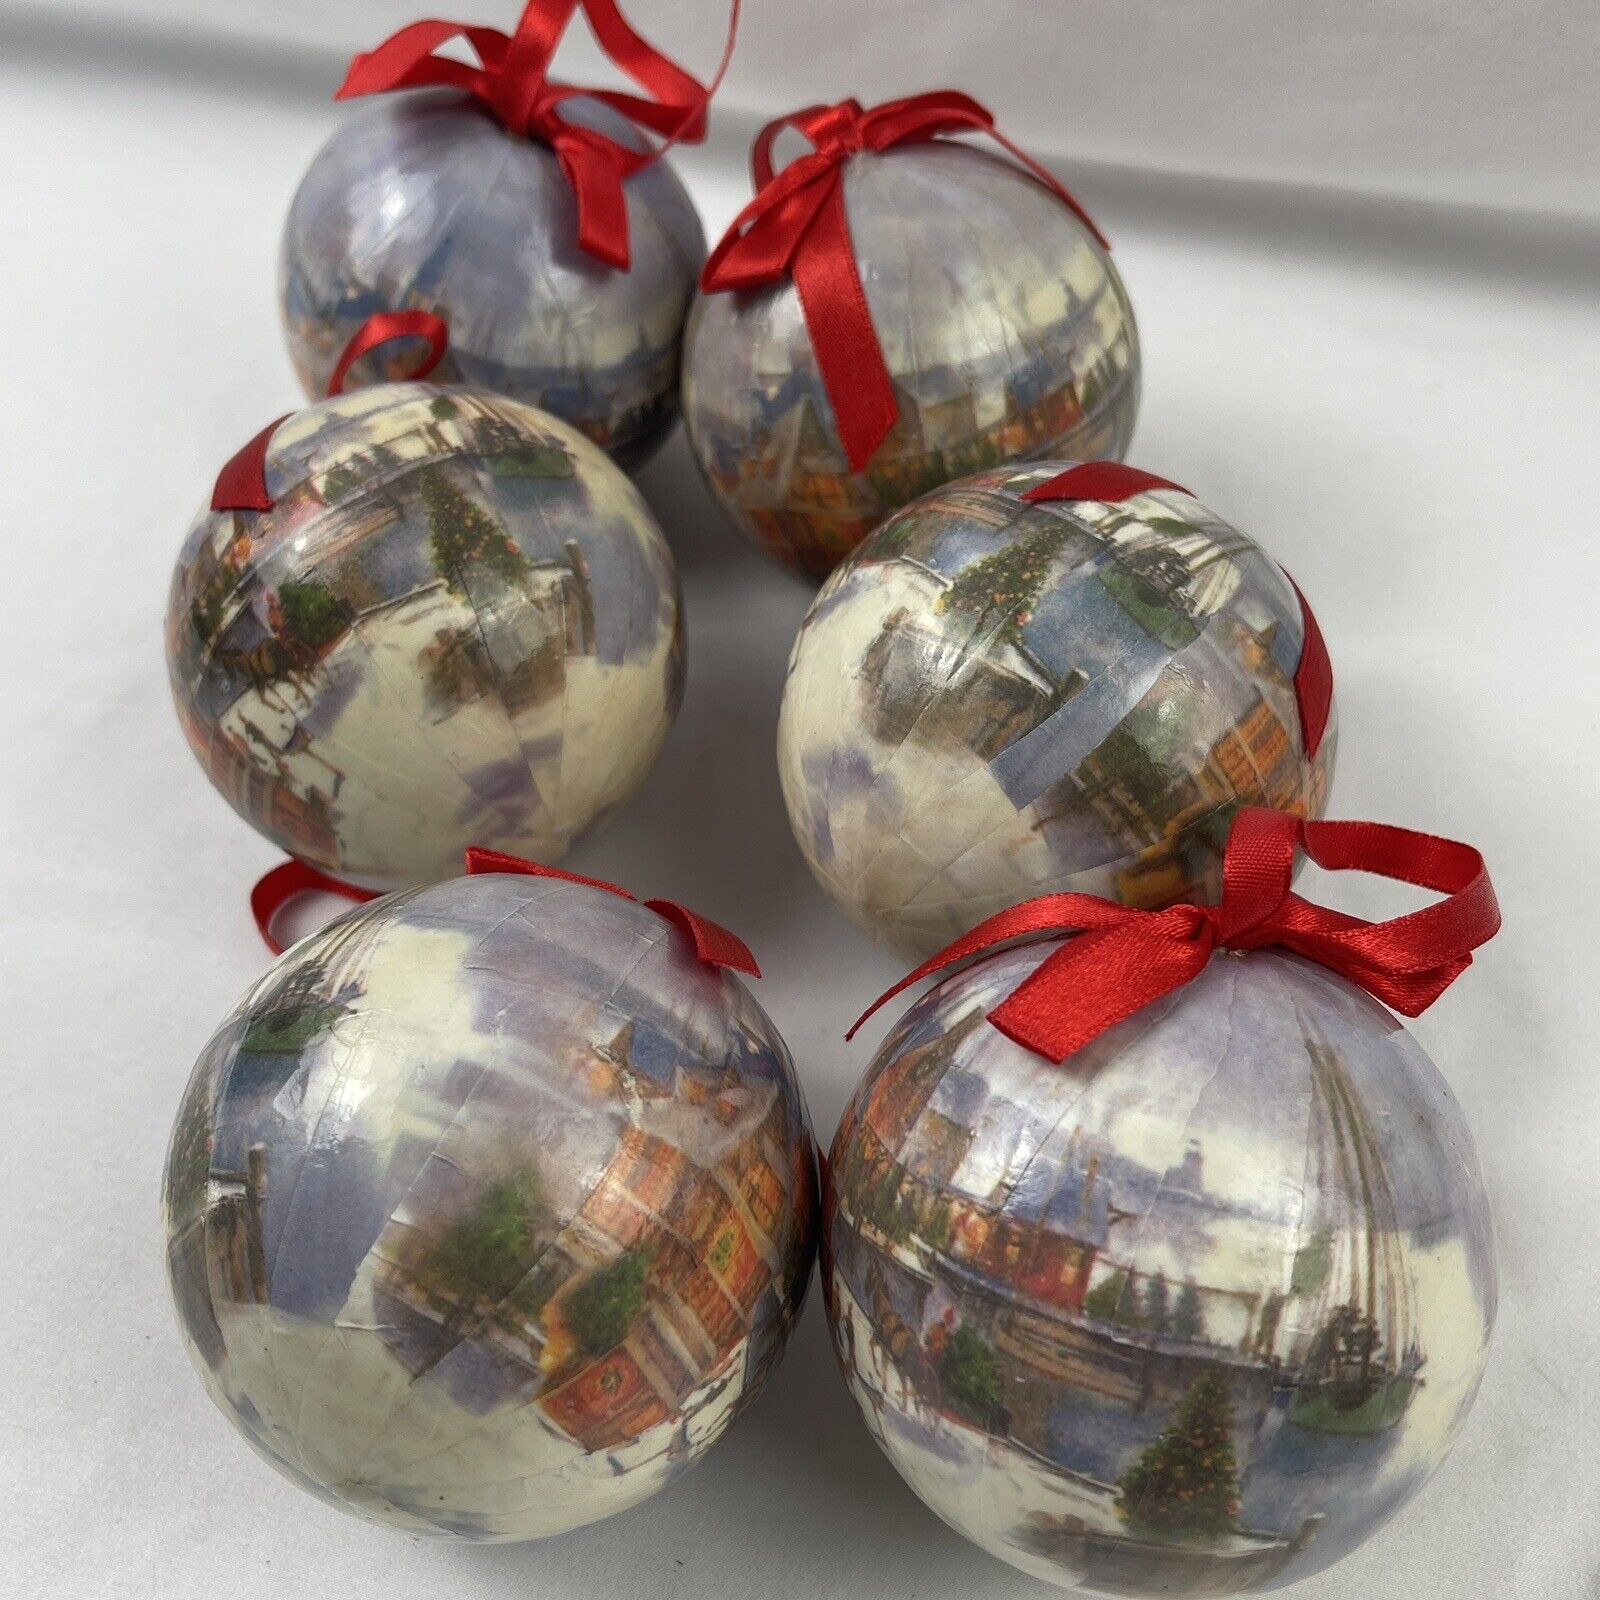 6 Vintage Paper Mache Decoupage Christmas Ornaments Colonial Holiday at The Dock